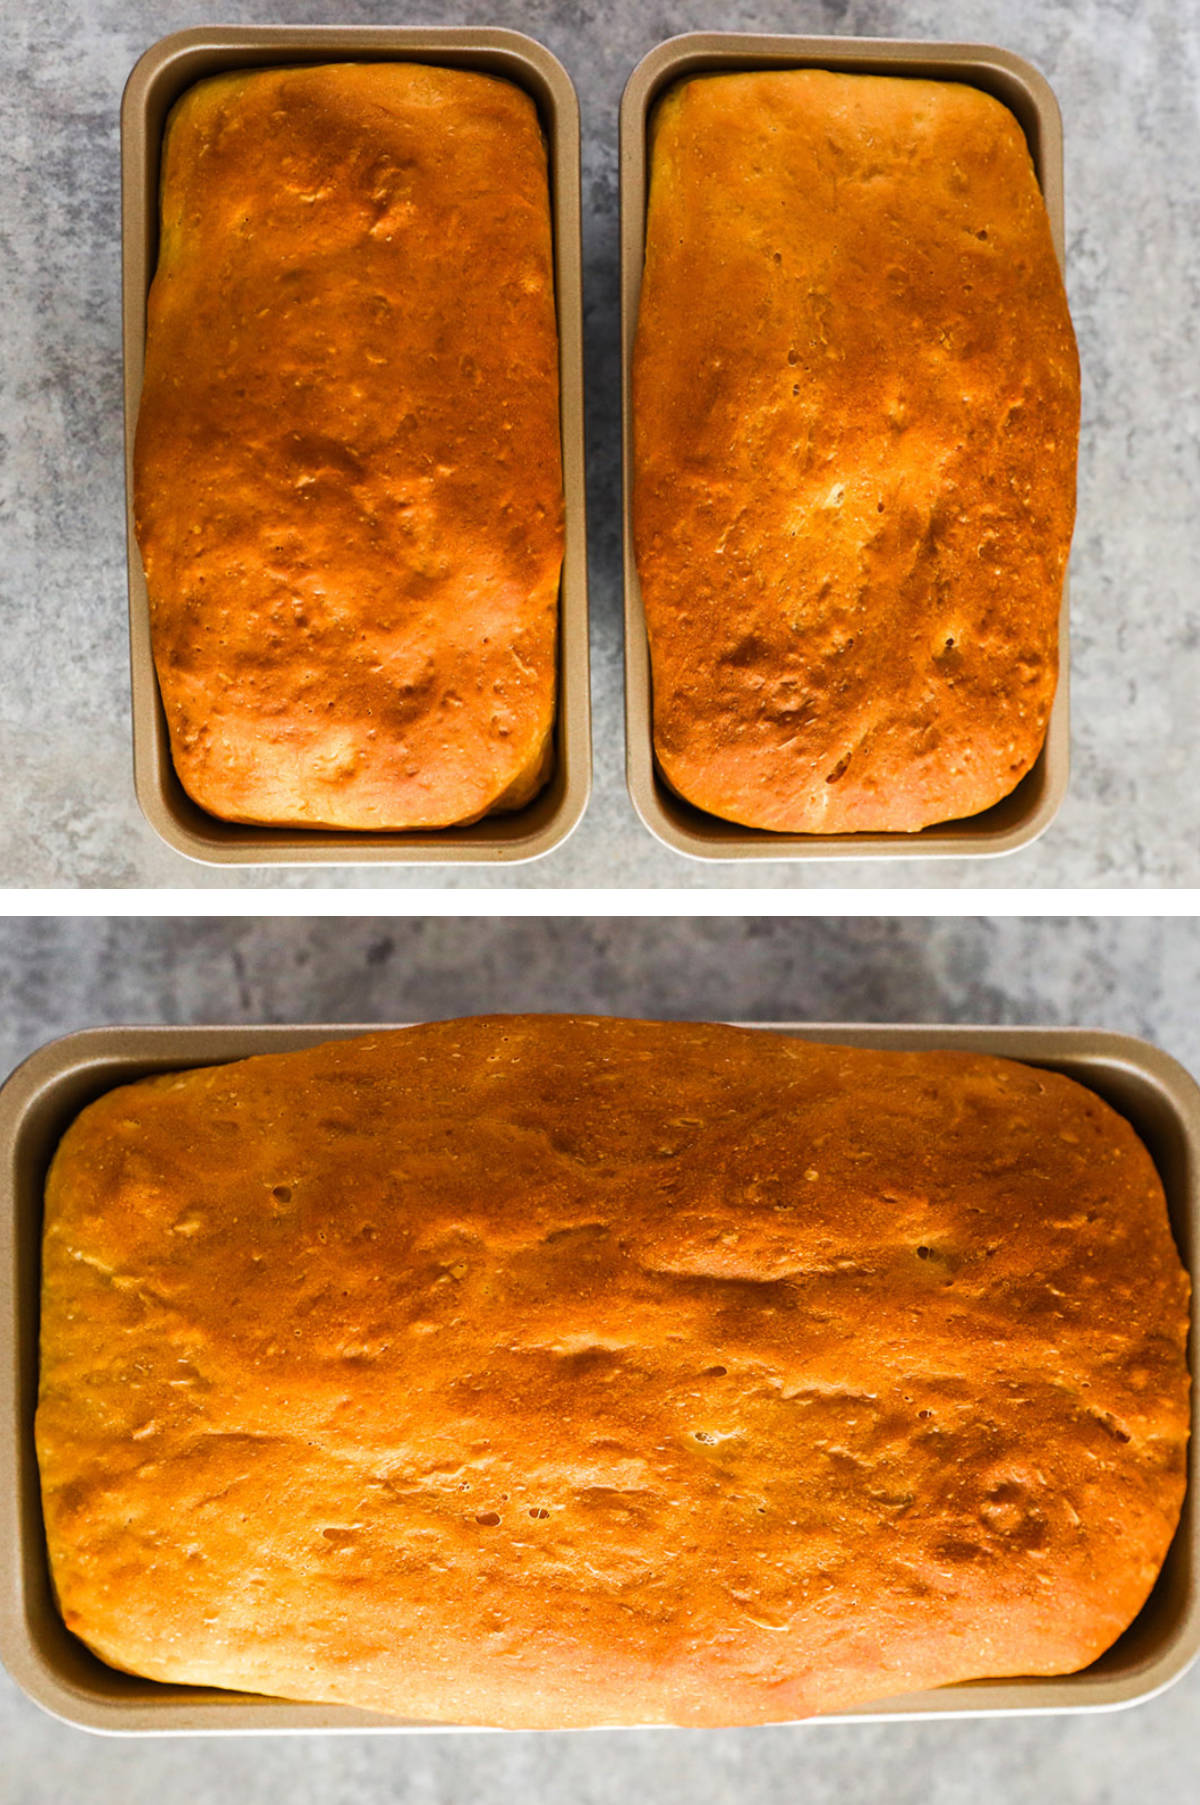 Two overhead images in one: 1. Two golden brown loaves in two pans. 2. Closeup of one of the baked loaves in the pan. 